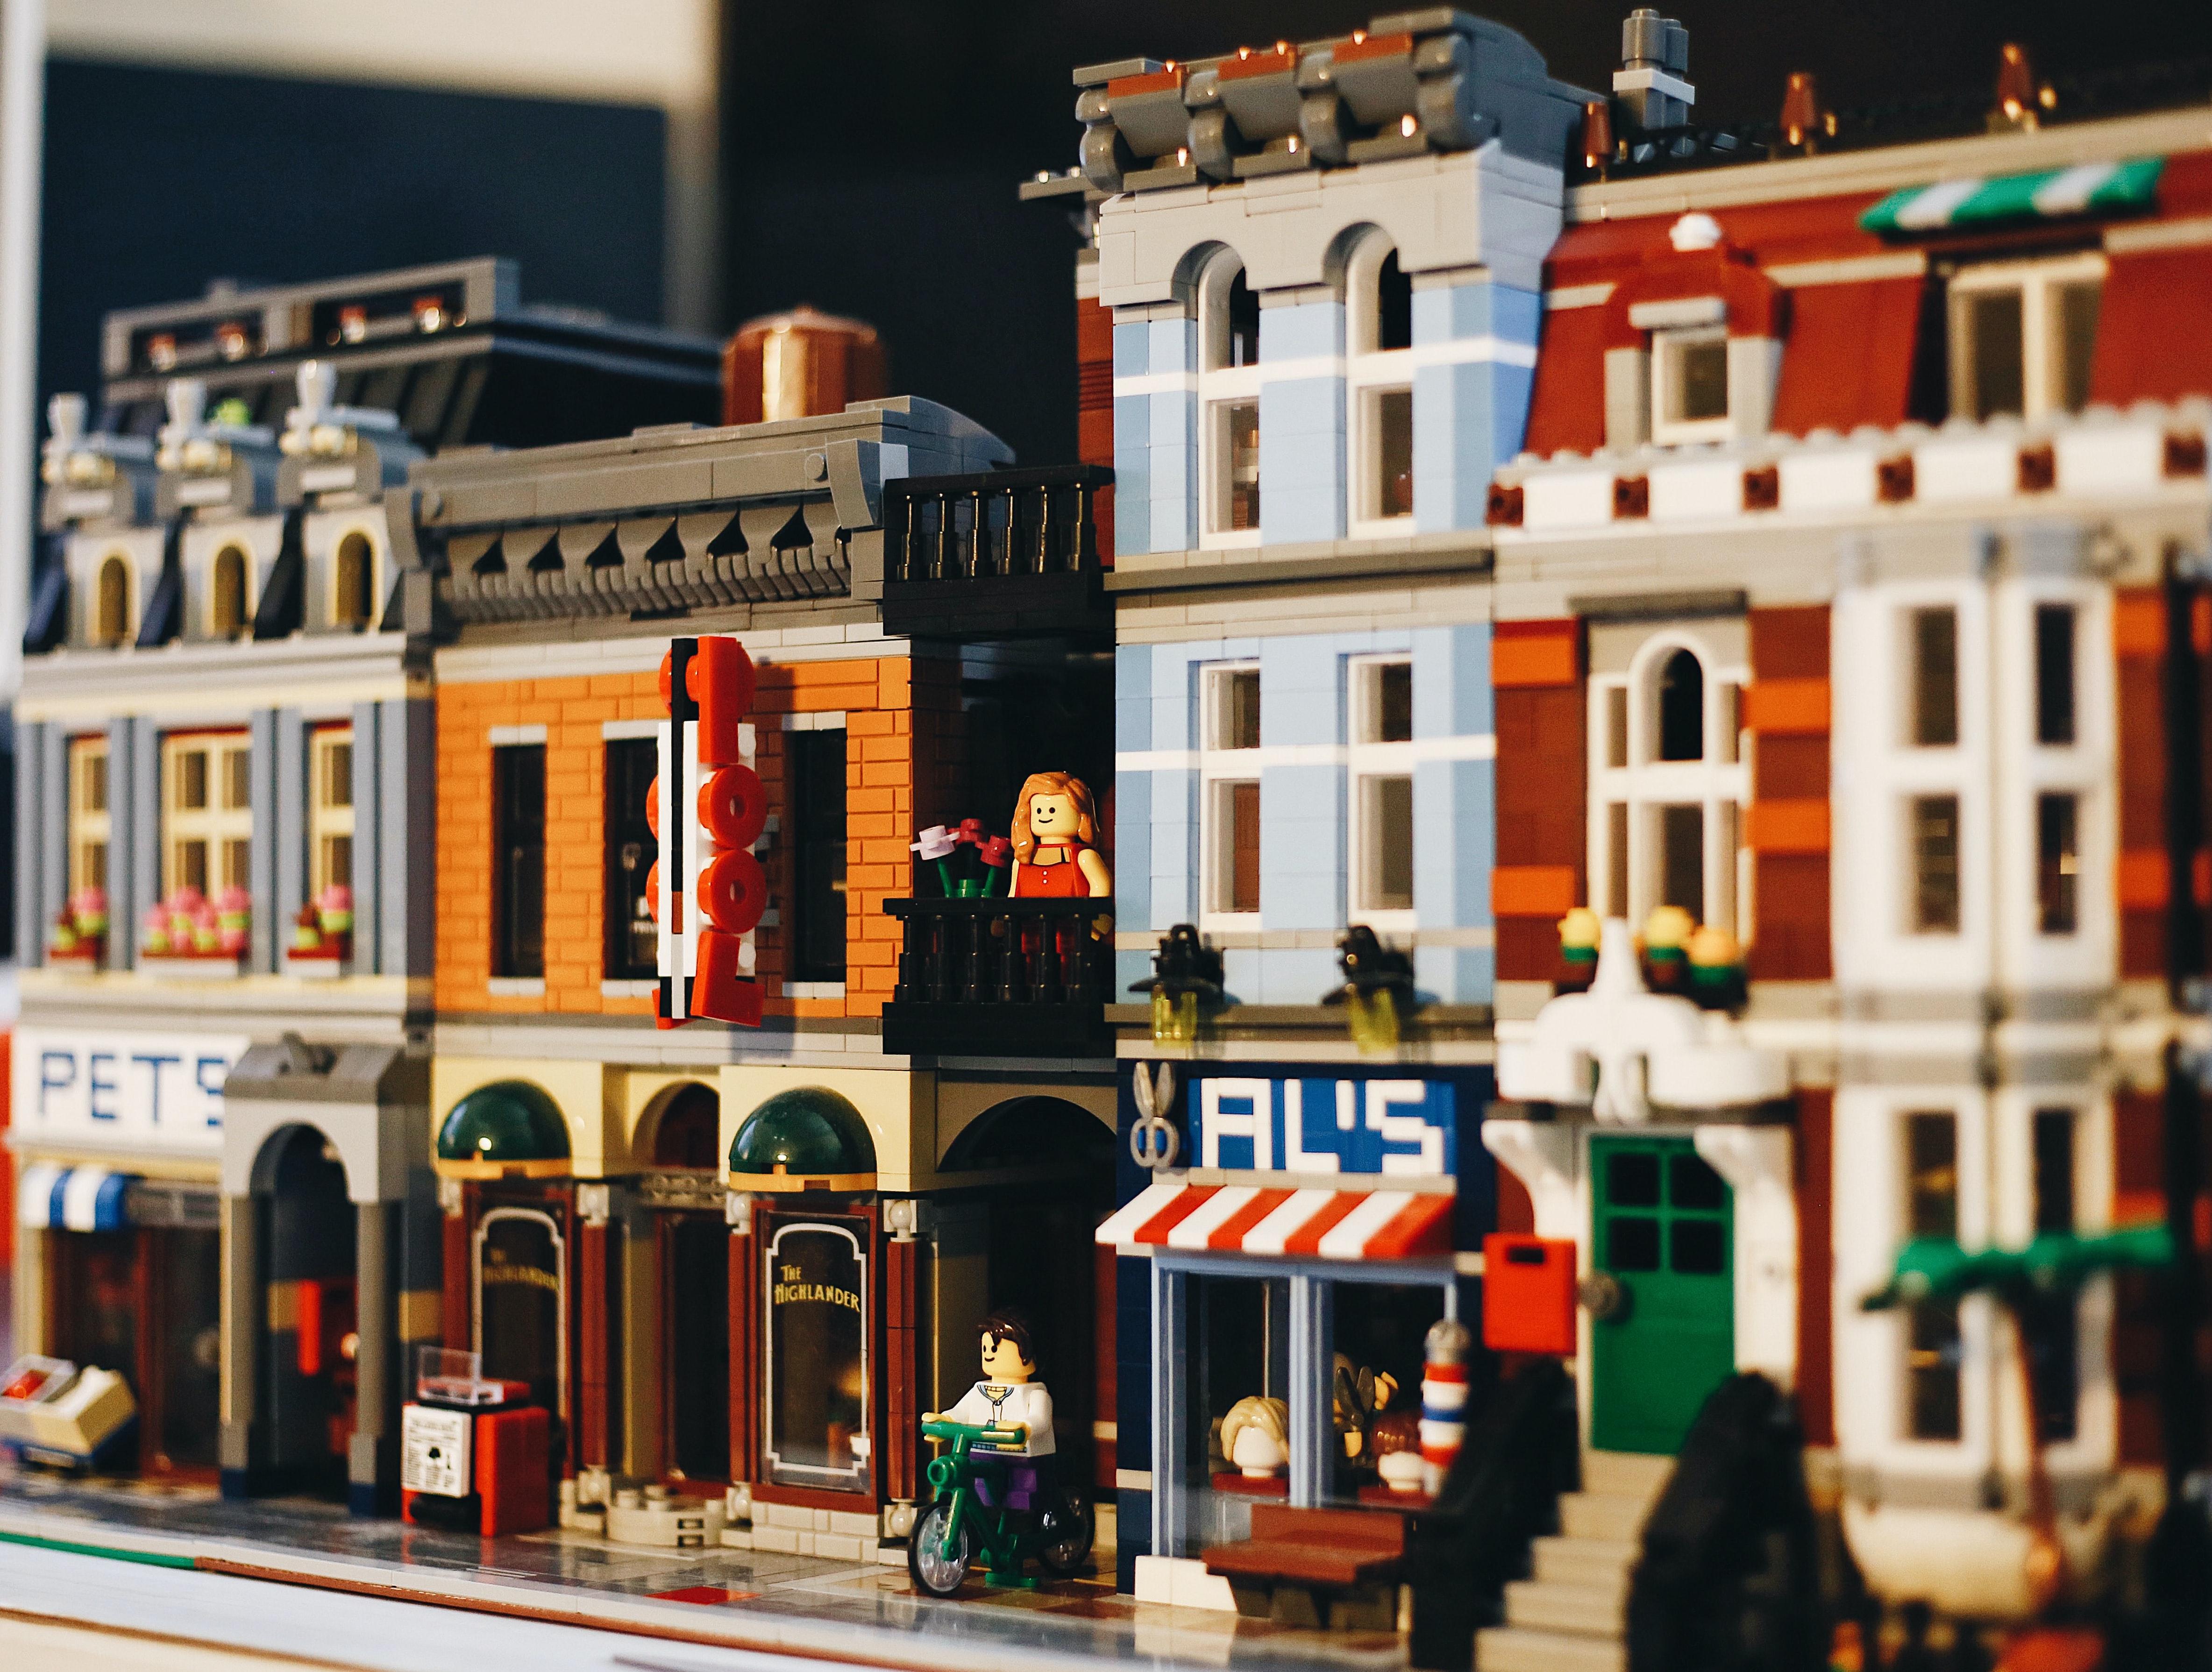 A town made of LEGO